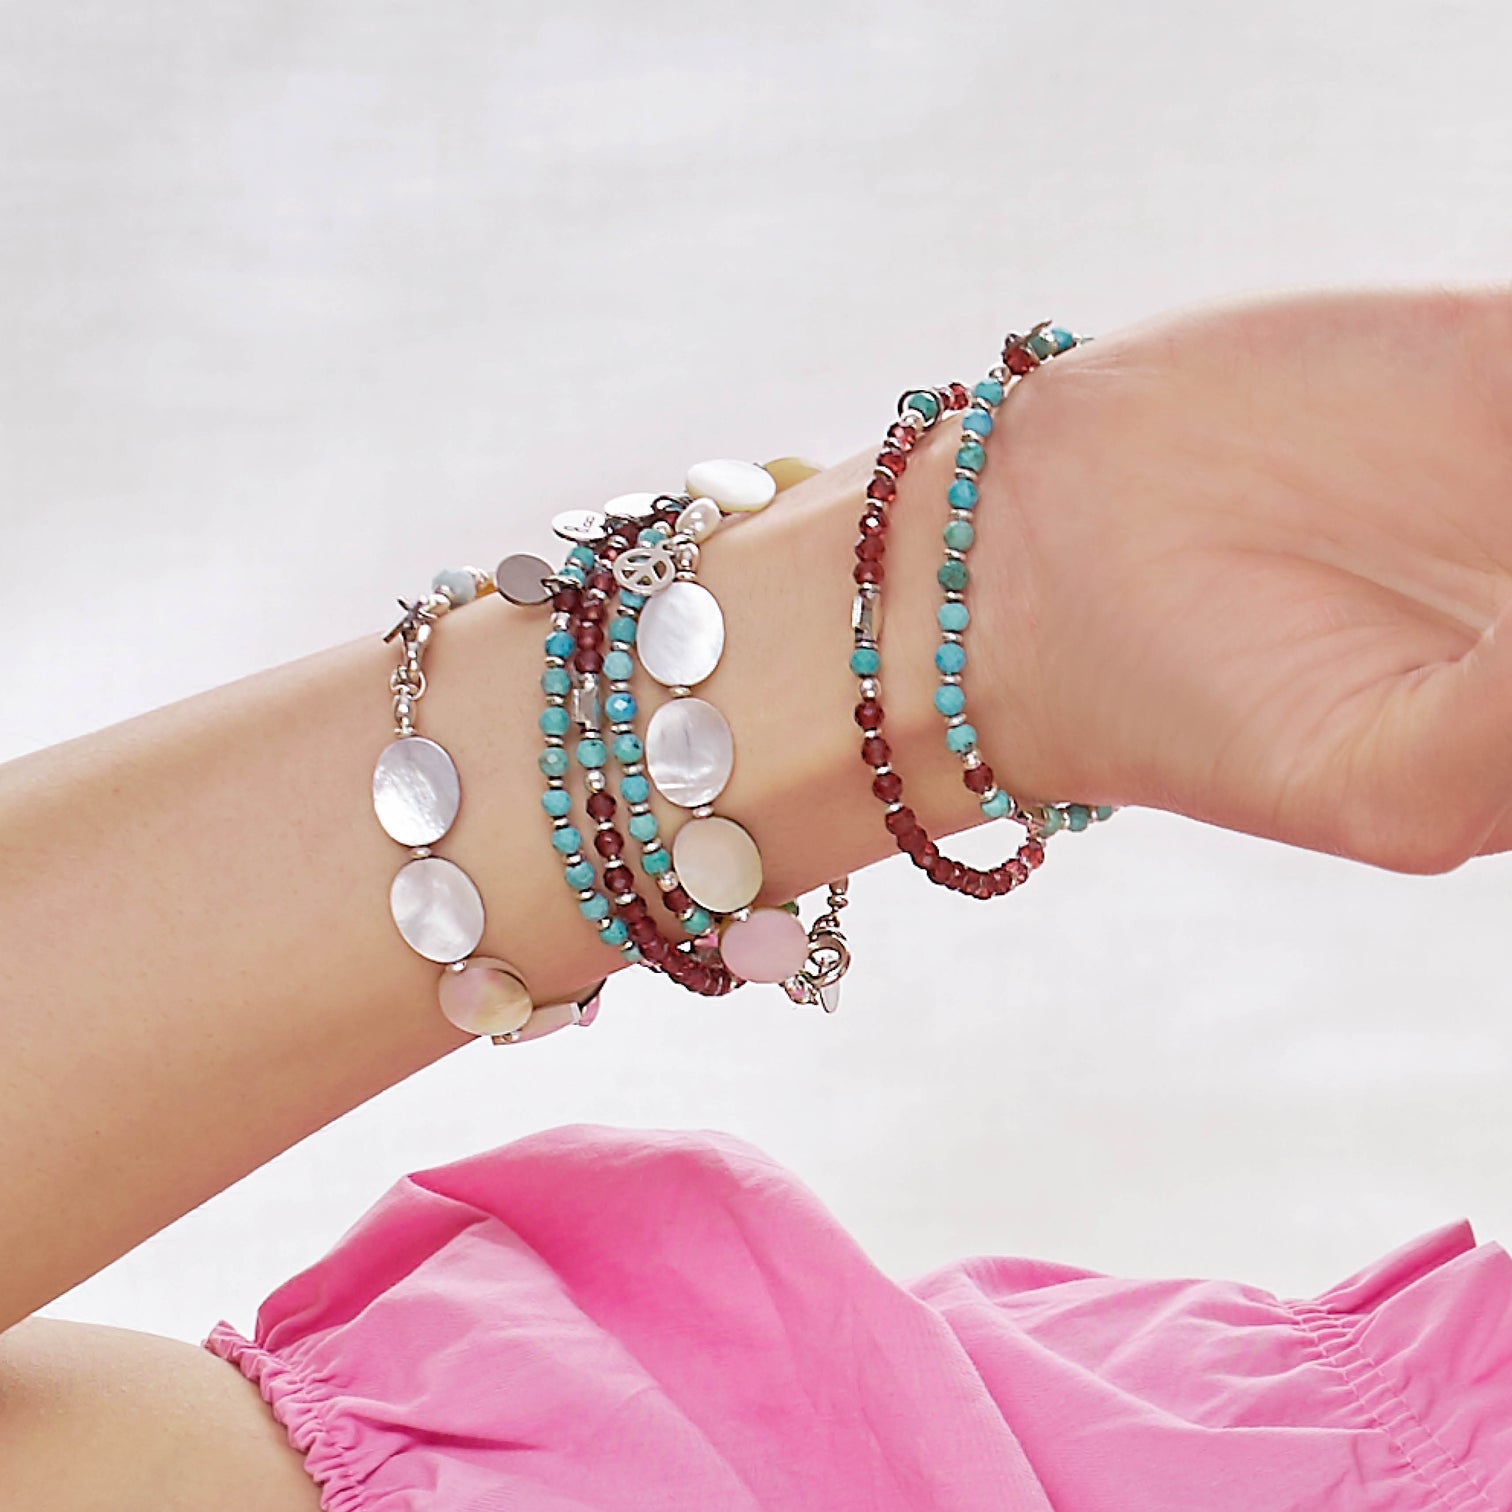 Detail Shot of a Female Mode's wrist. She is wearing the Kya Bracelet made with Turquoise, and Garnet , the Sia Bracelet made with Garnet and Turquoise and the Marilla Bracelet made with Mother of Pearl.